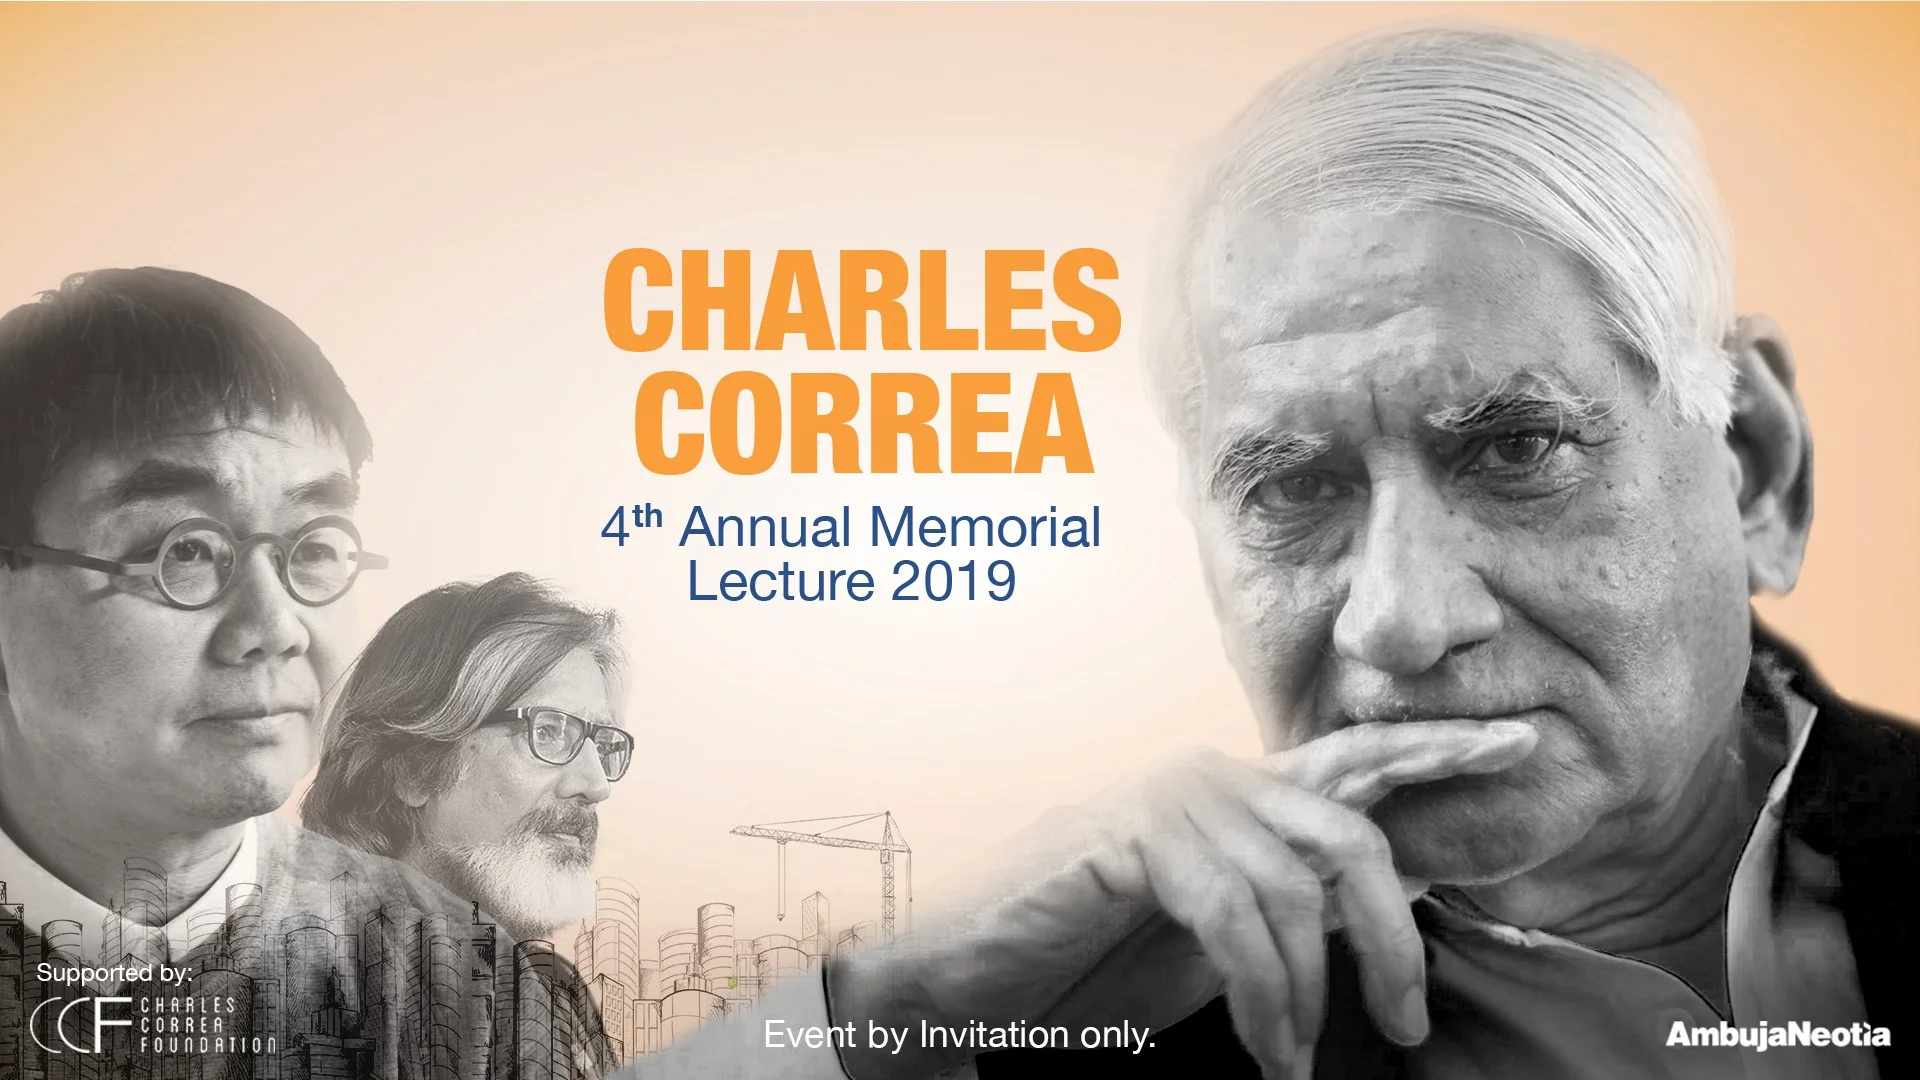 A tribute to the legacy of Charles Correa